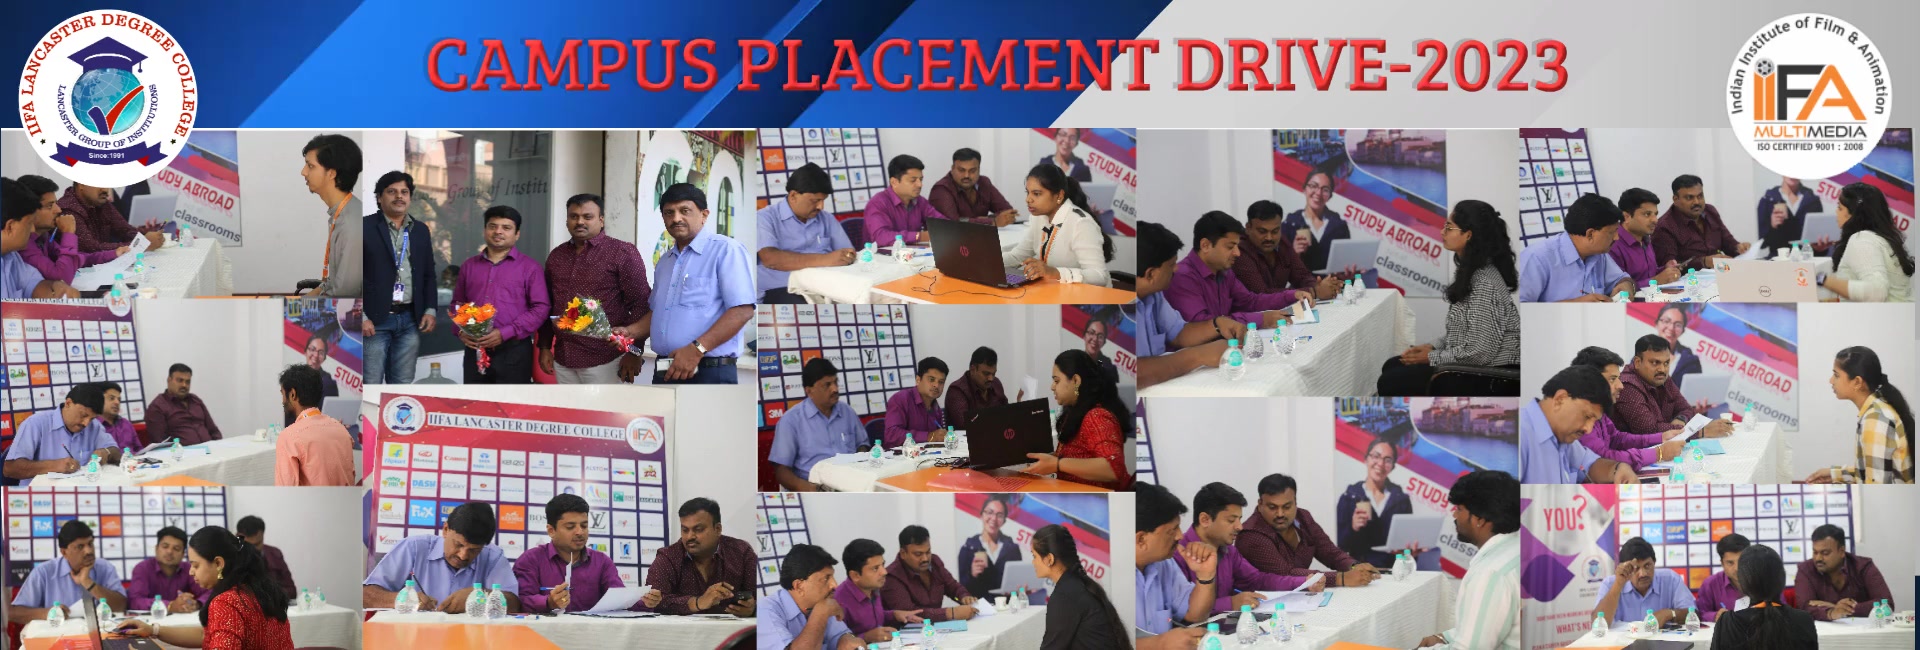 campus-placement-drive